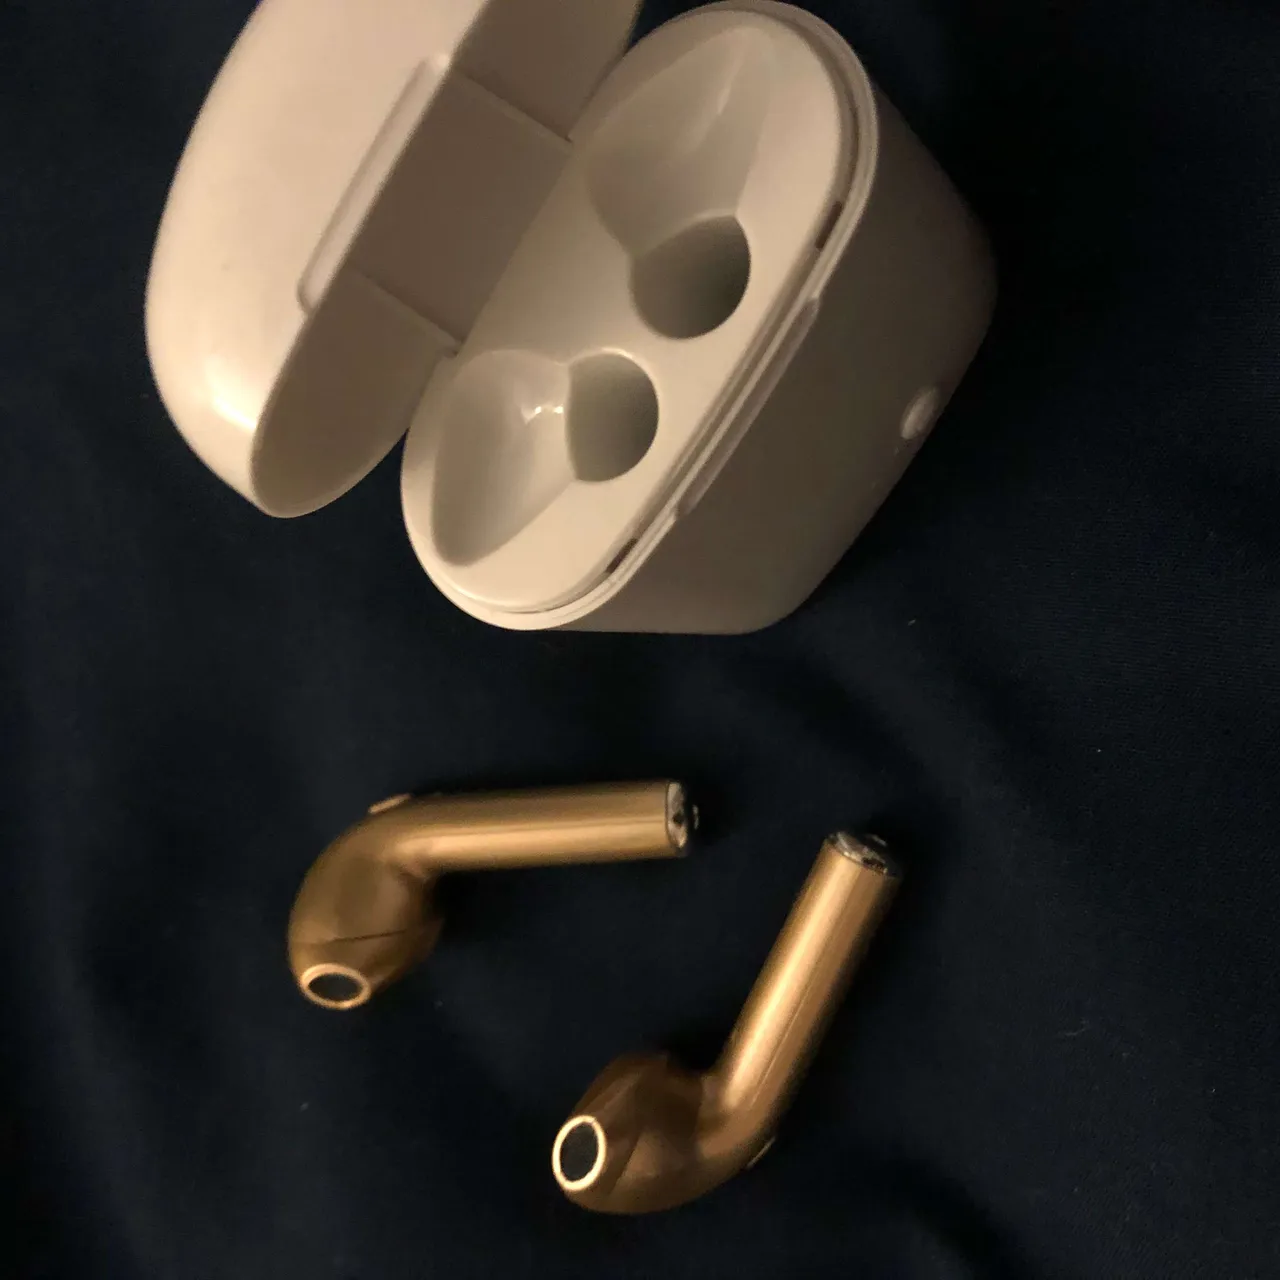 Crappy Knock-Off Airpods photo 1